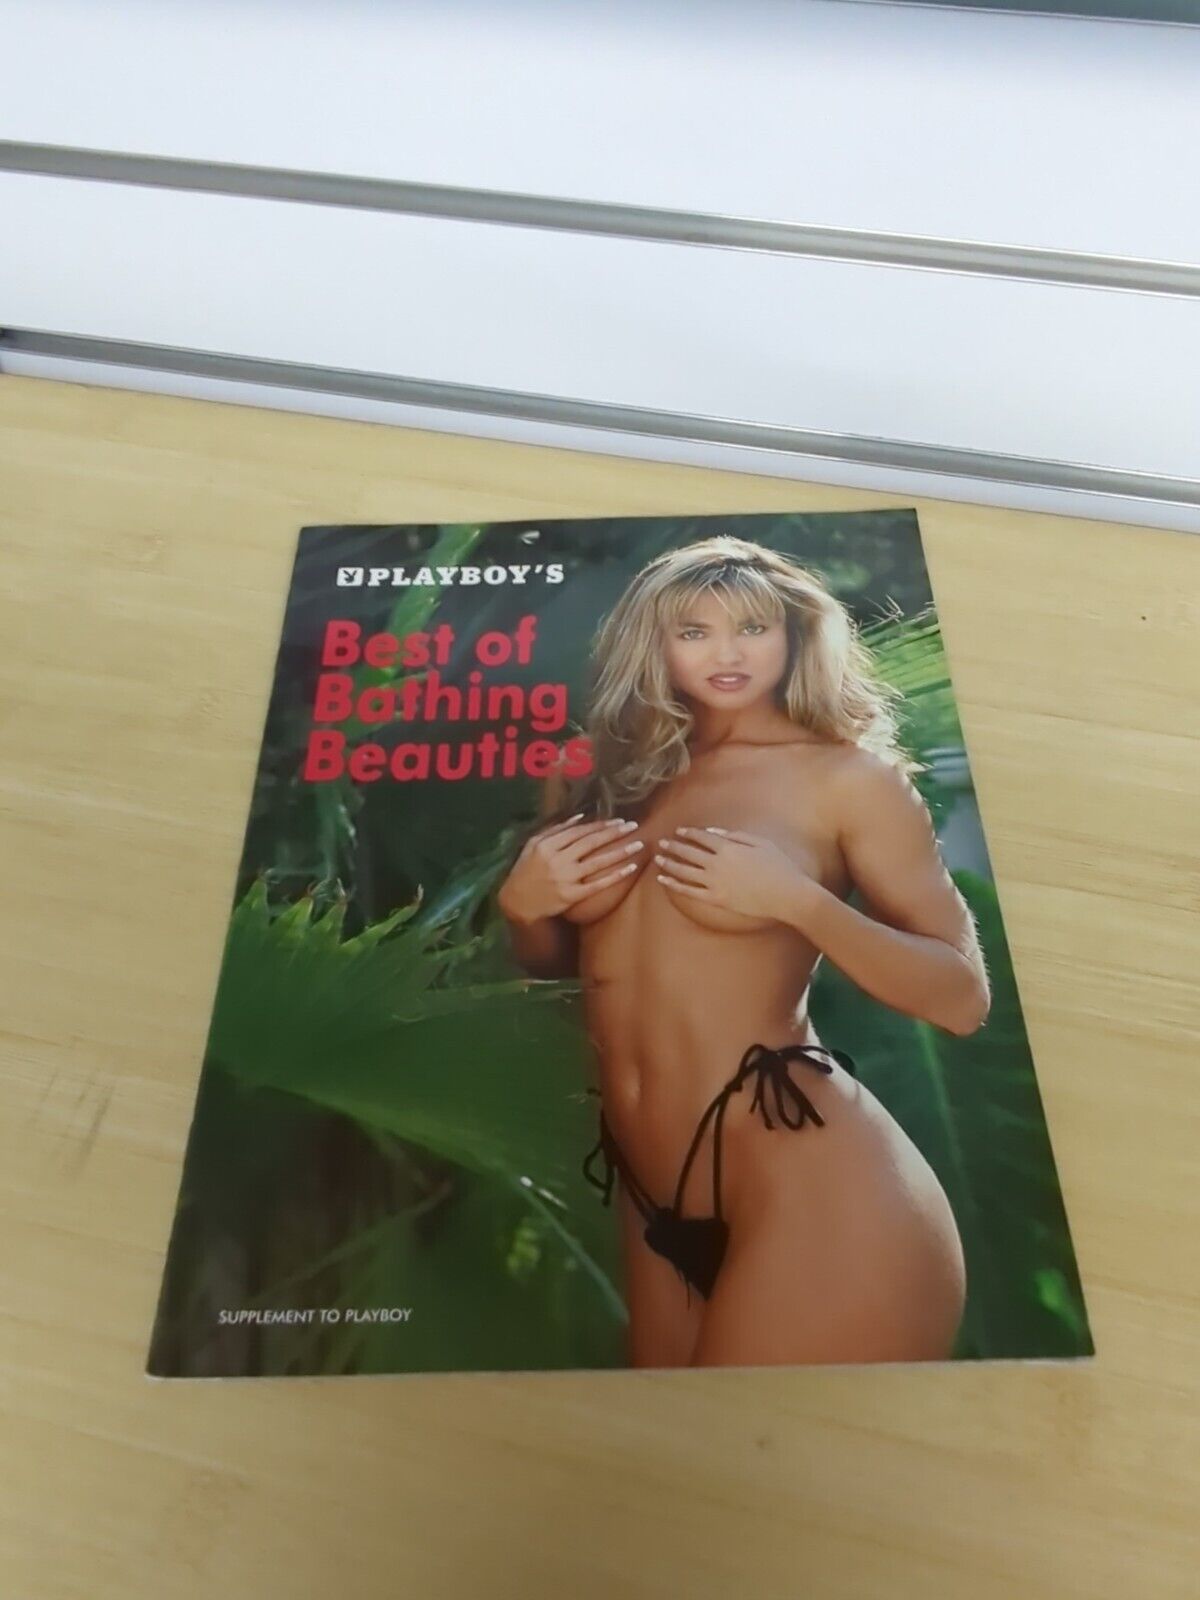 Playboy’s Best of Bathing Beauties. Over 35 Centerfolds